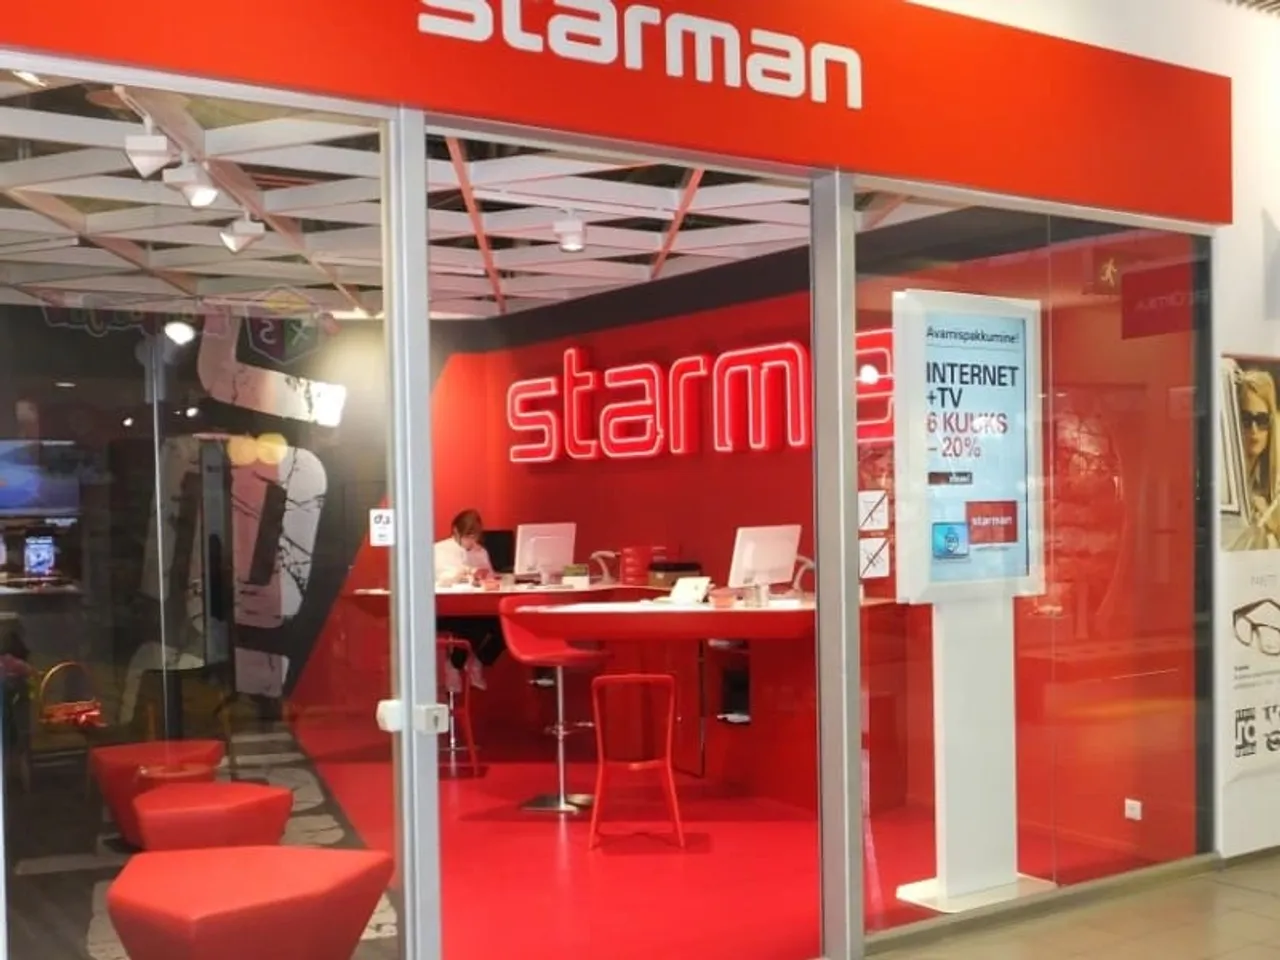 Starman the largest cable operator in the Baltic States